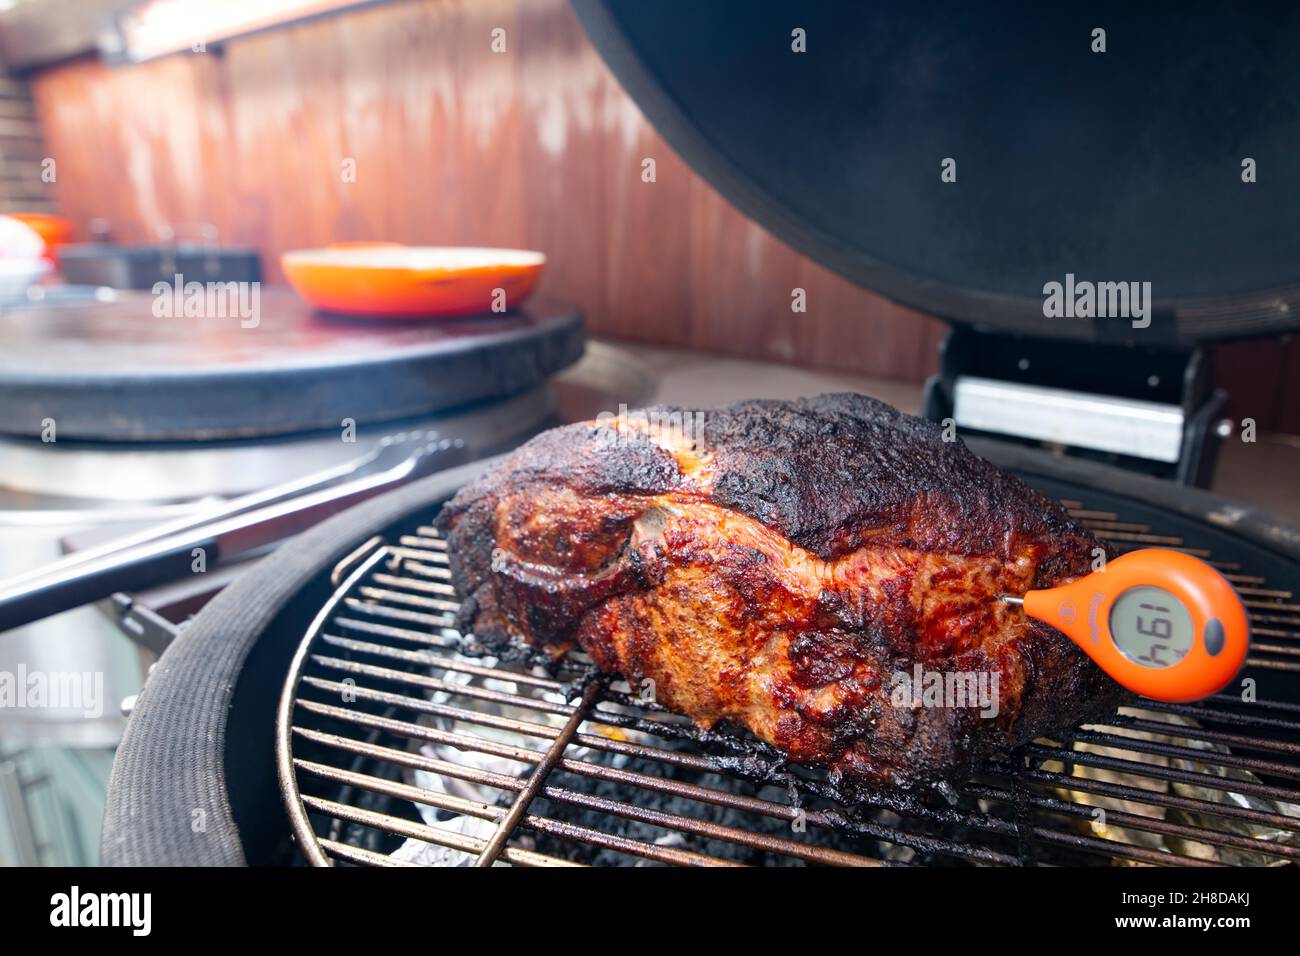 Outdoor kitchen smoker and flat top grill cooking a pork butt or shoulder using a meat thermometer to check internal temperature Stock Photo